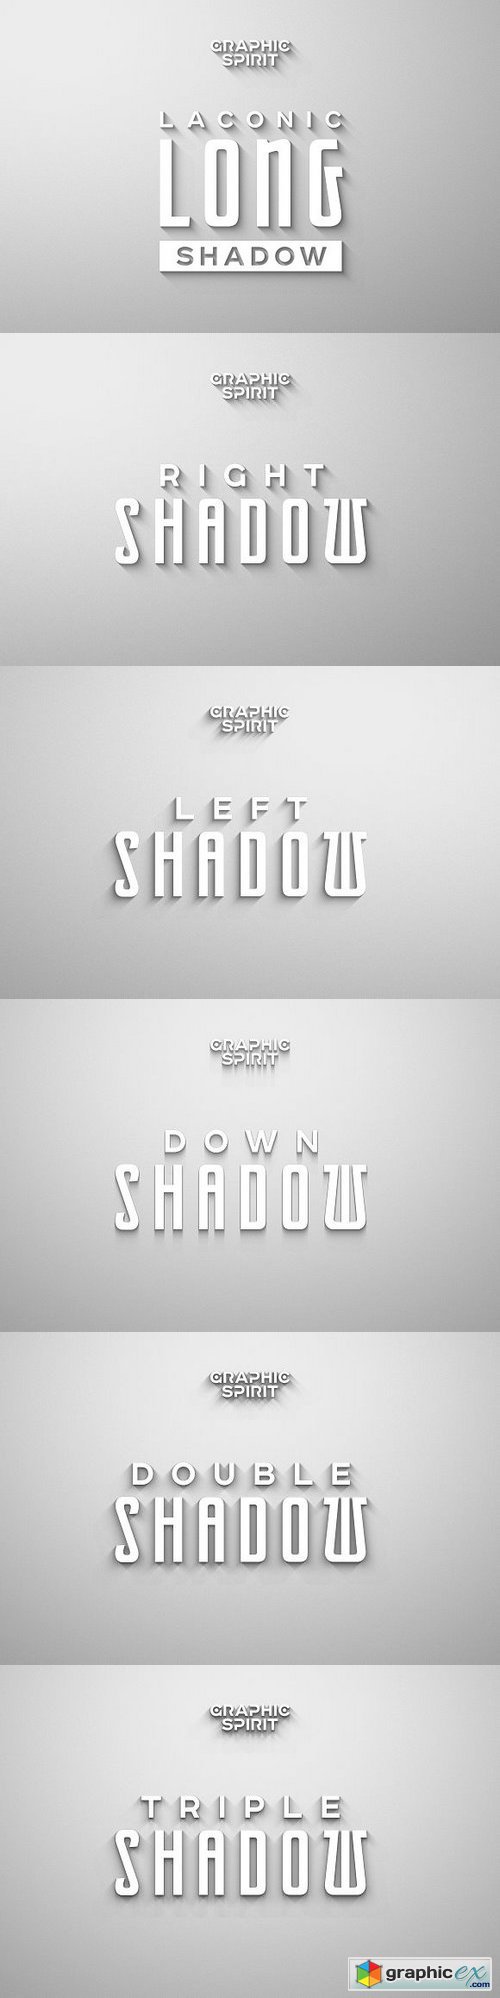 Laconic Long Shadow for Photoshop